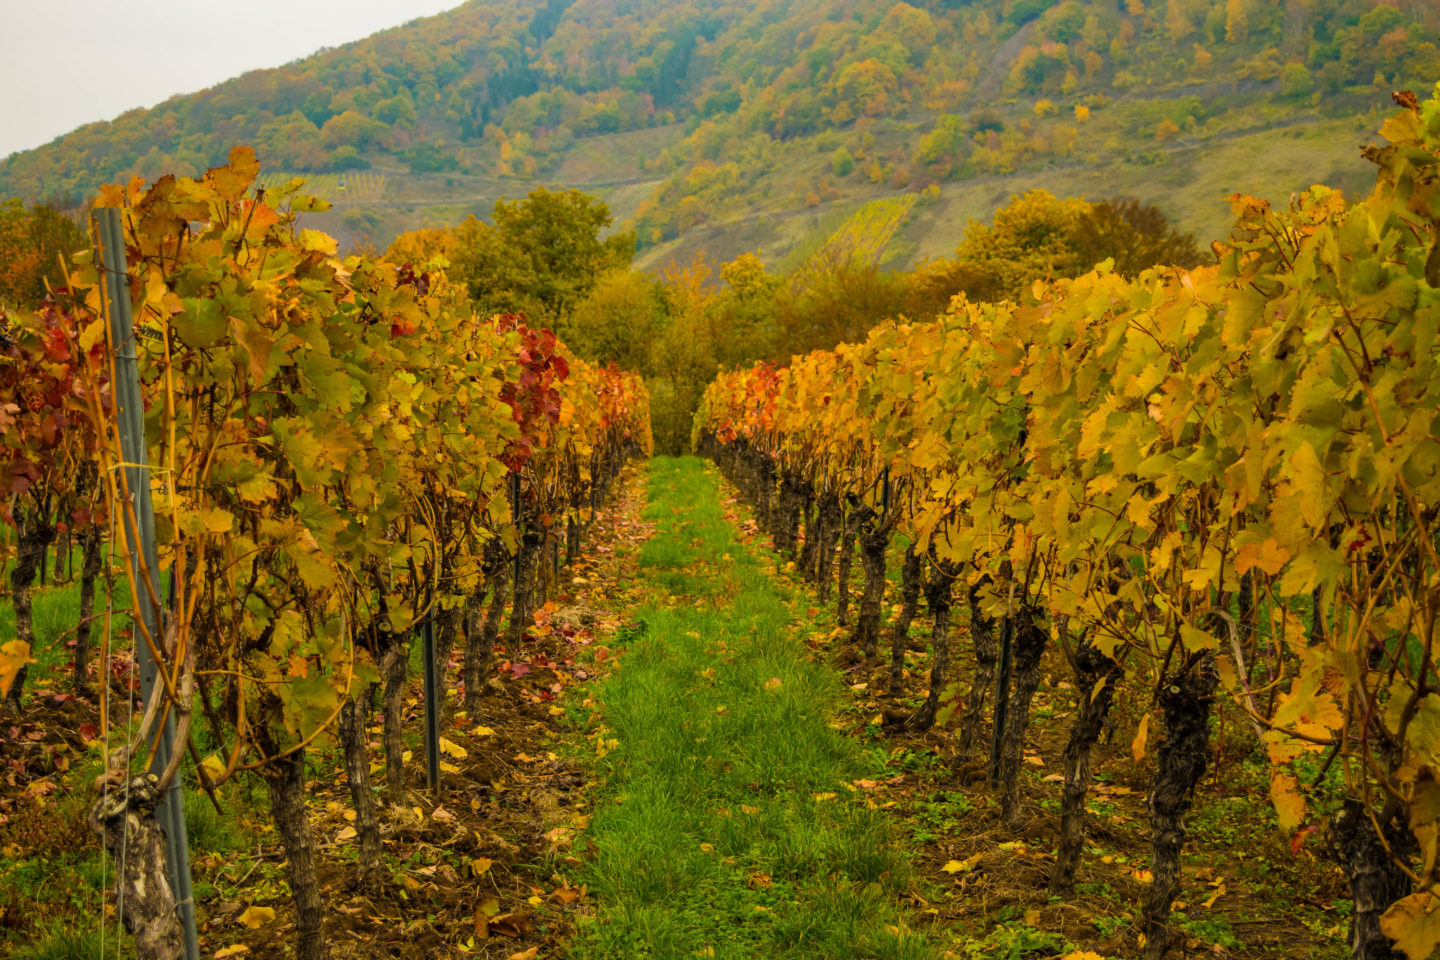 Incredible colours of the grape vines in autumn. 